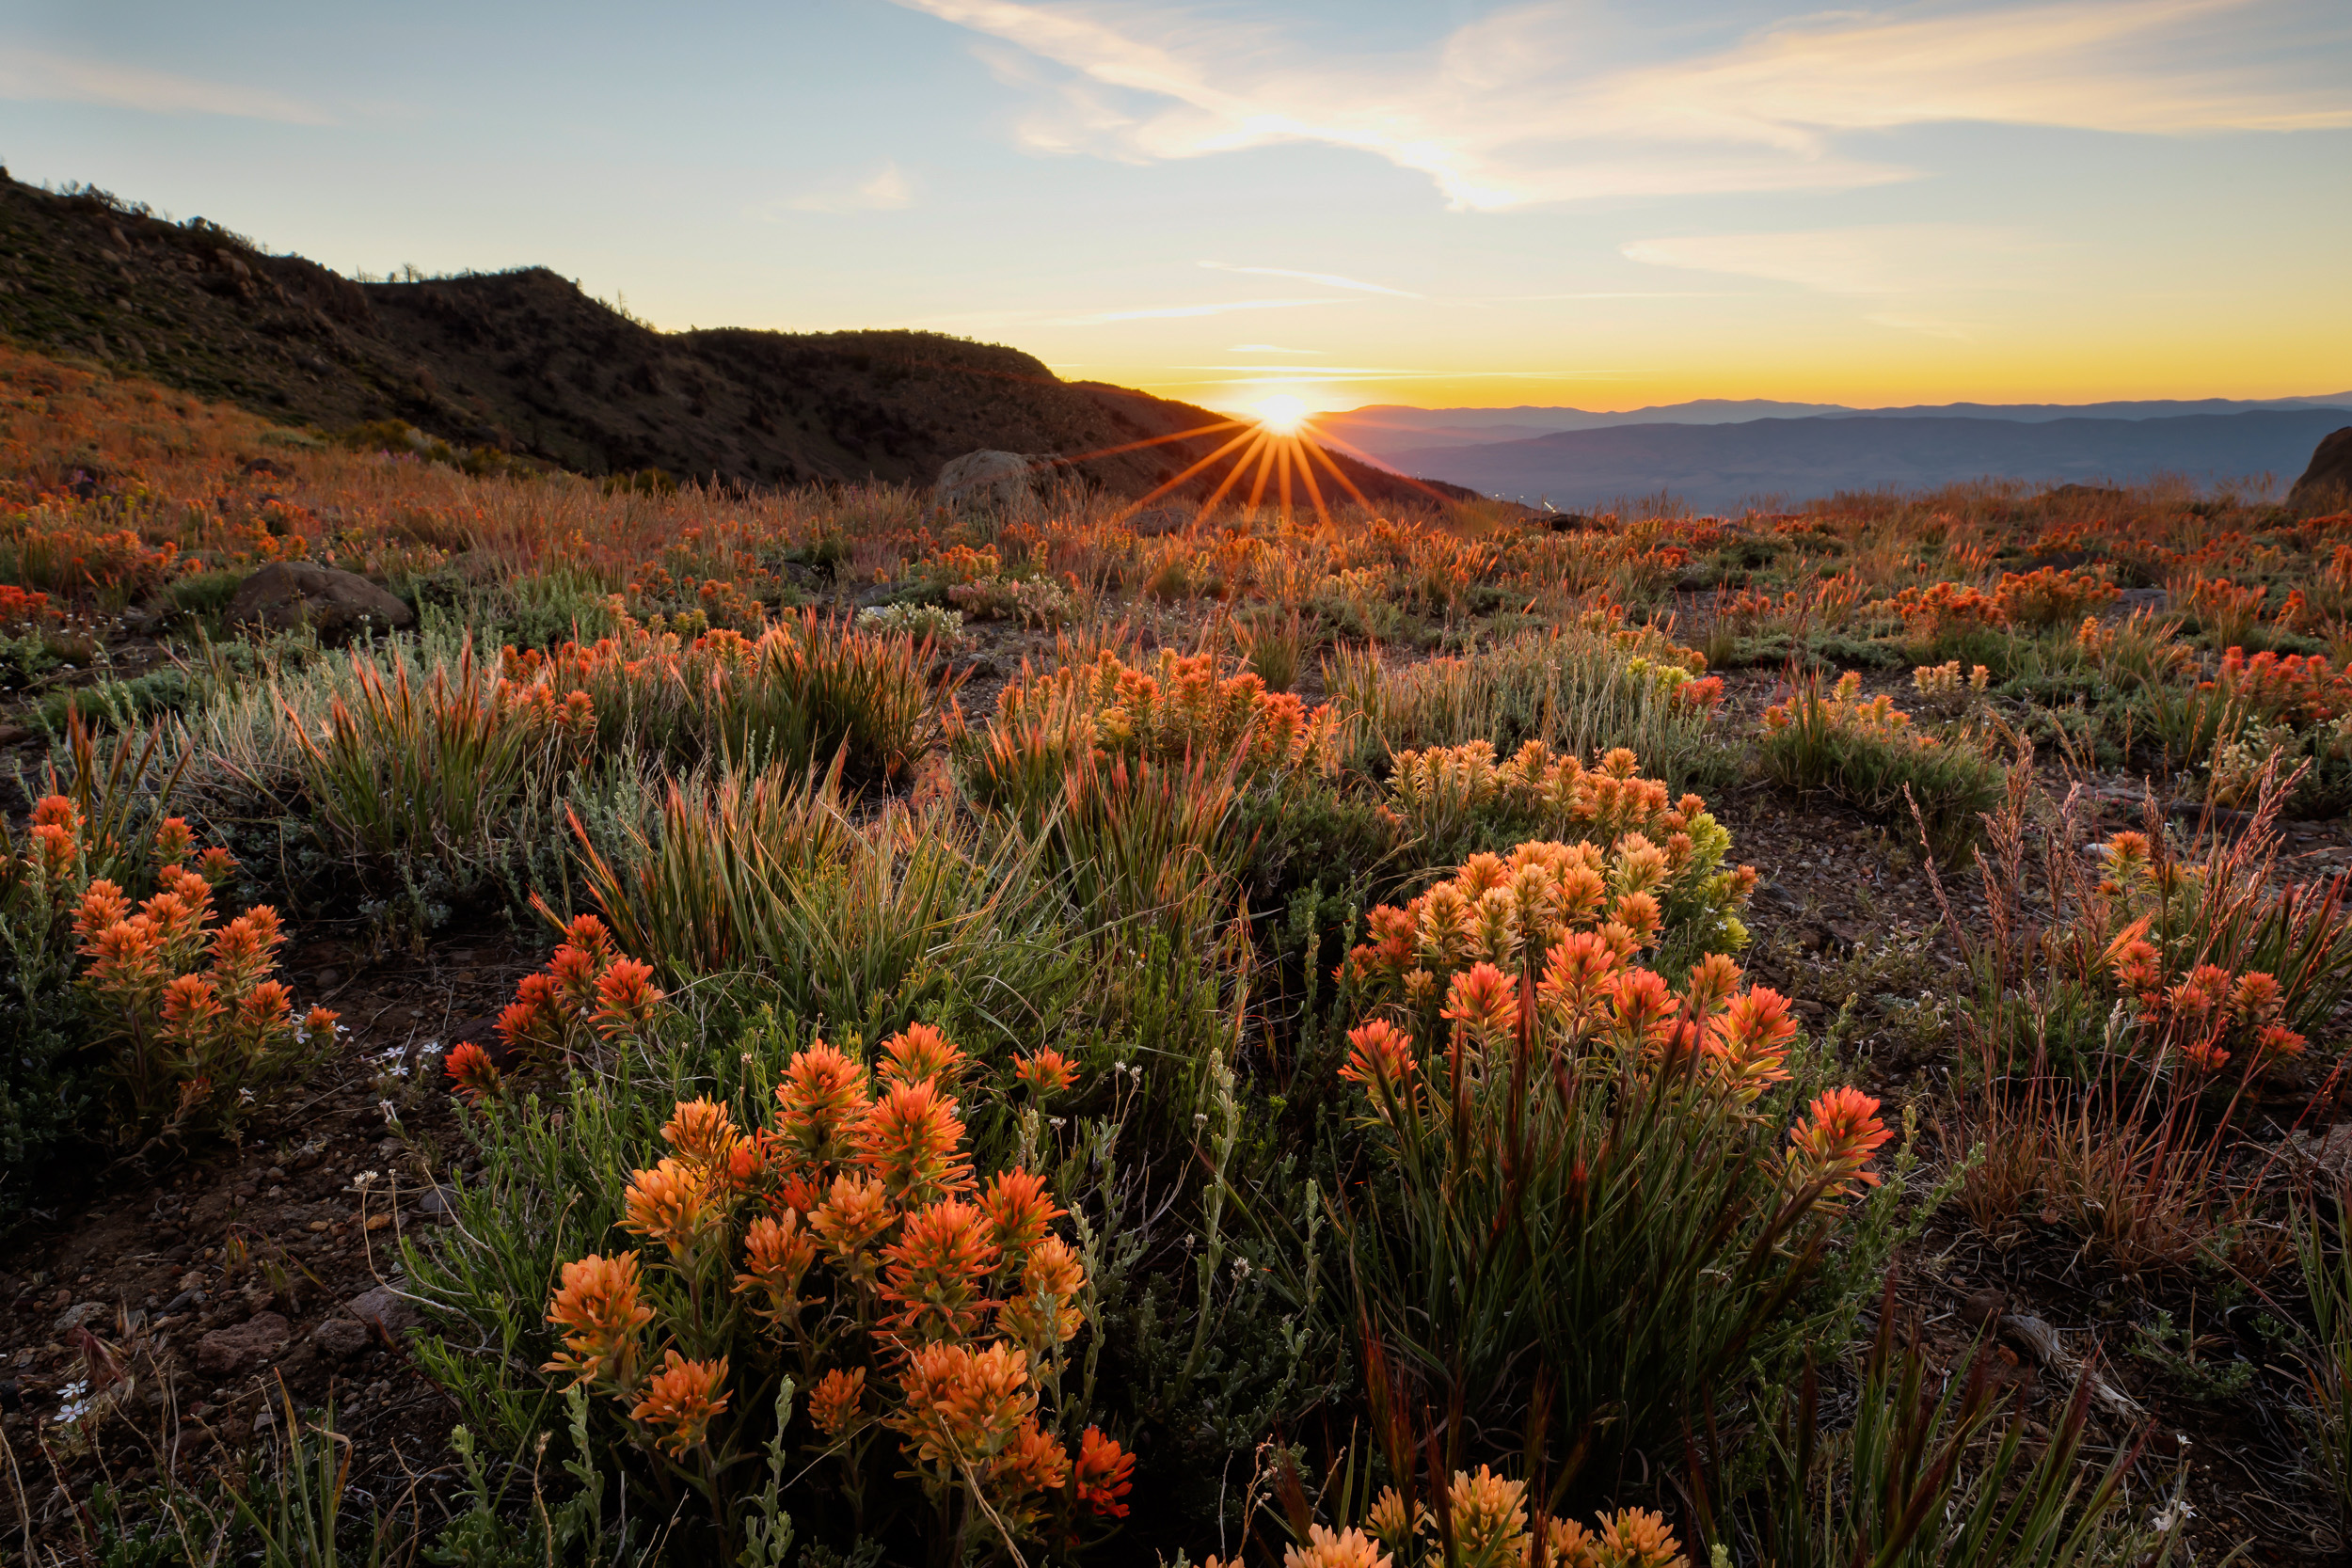 Monitor Pass Landscape With Sunset And Flowers Image Free Stock